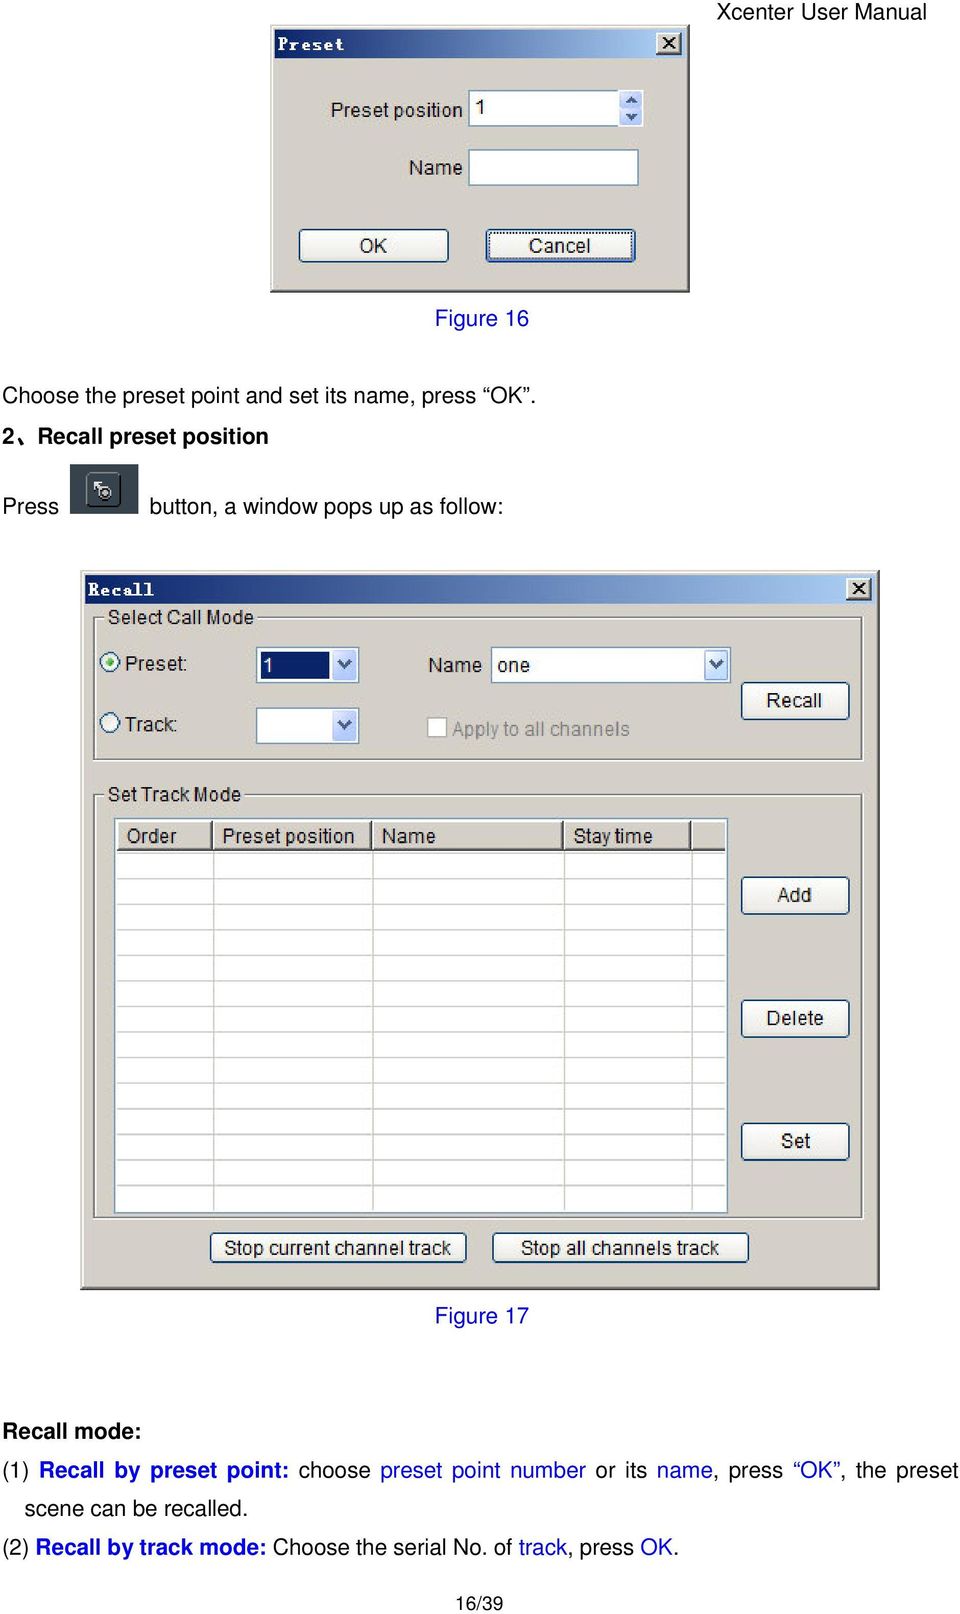 (1) Recall by preset point: choose preset point number or its name, press OK, the preset